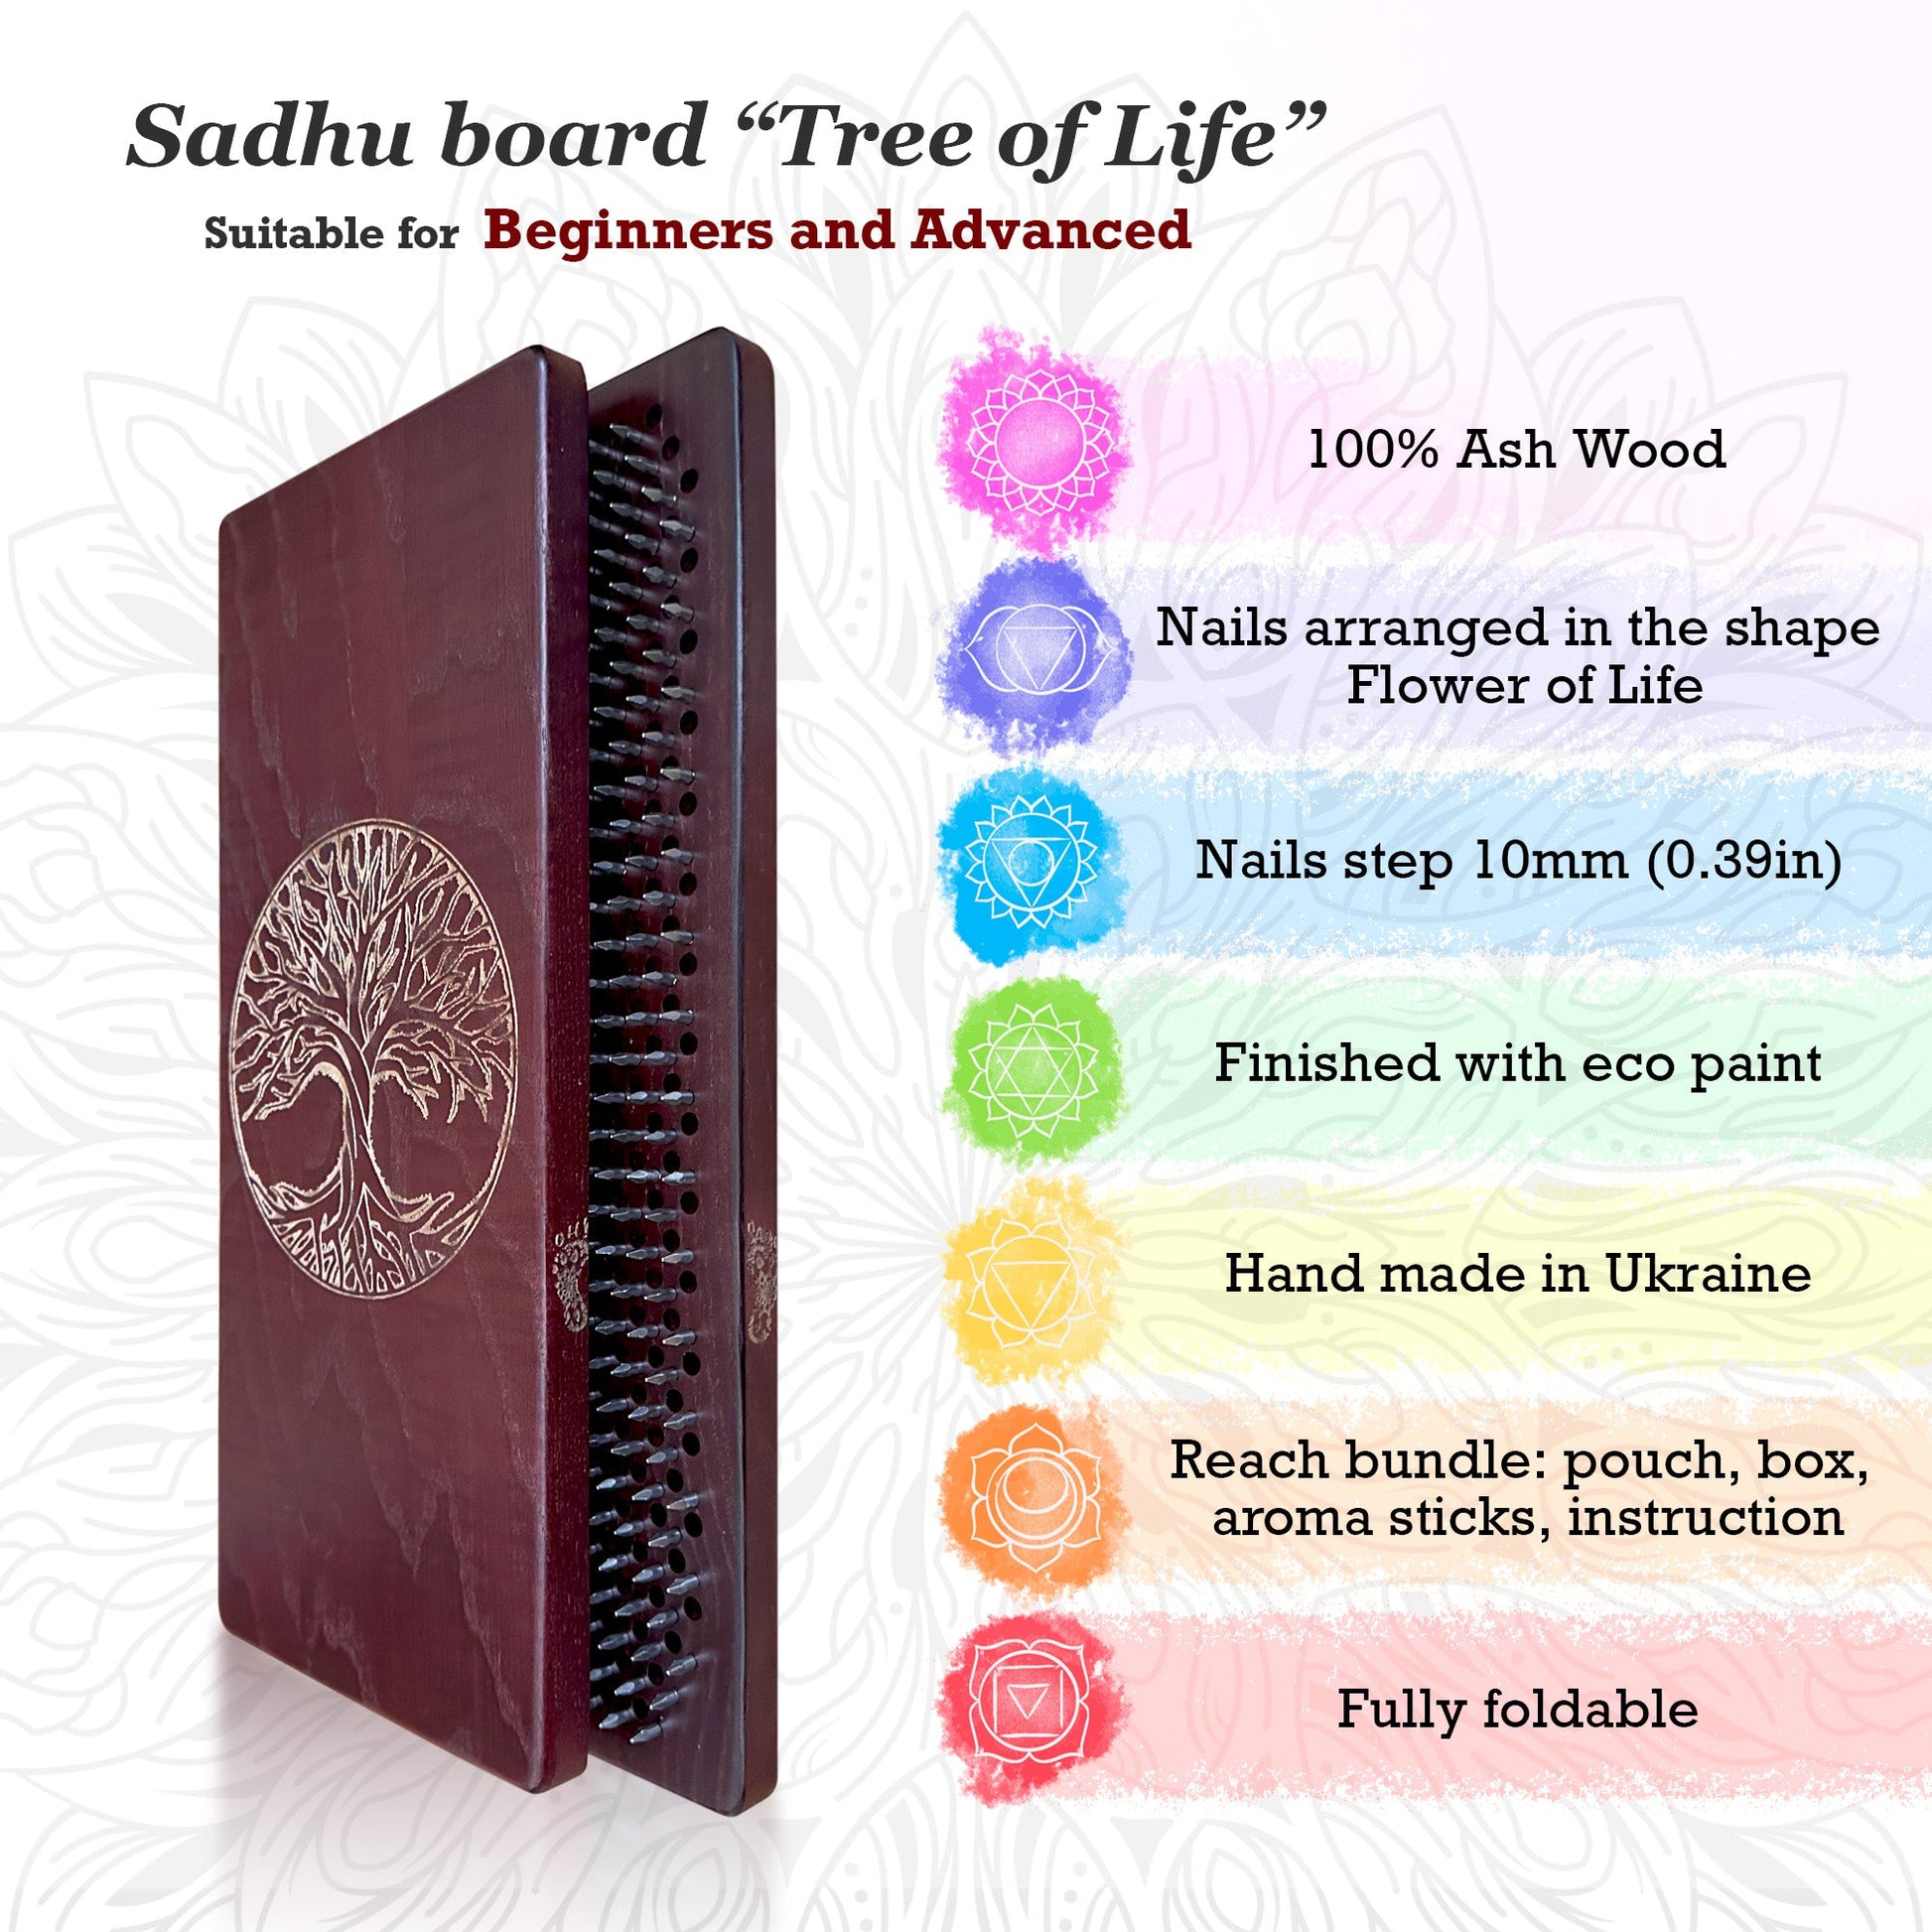 Features of Oh! Sadhu board nails